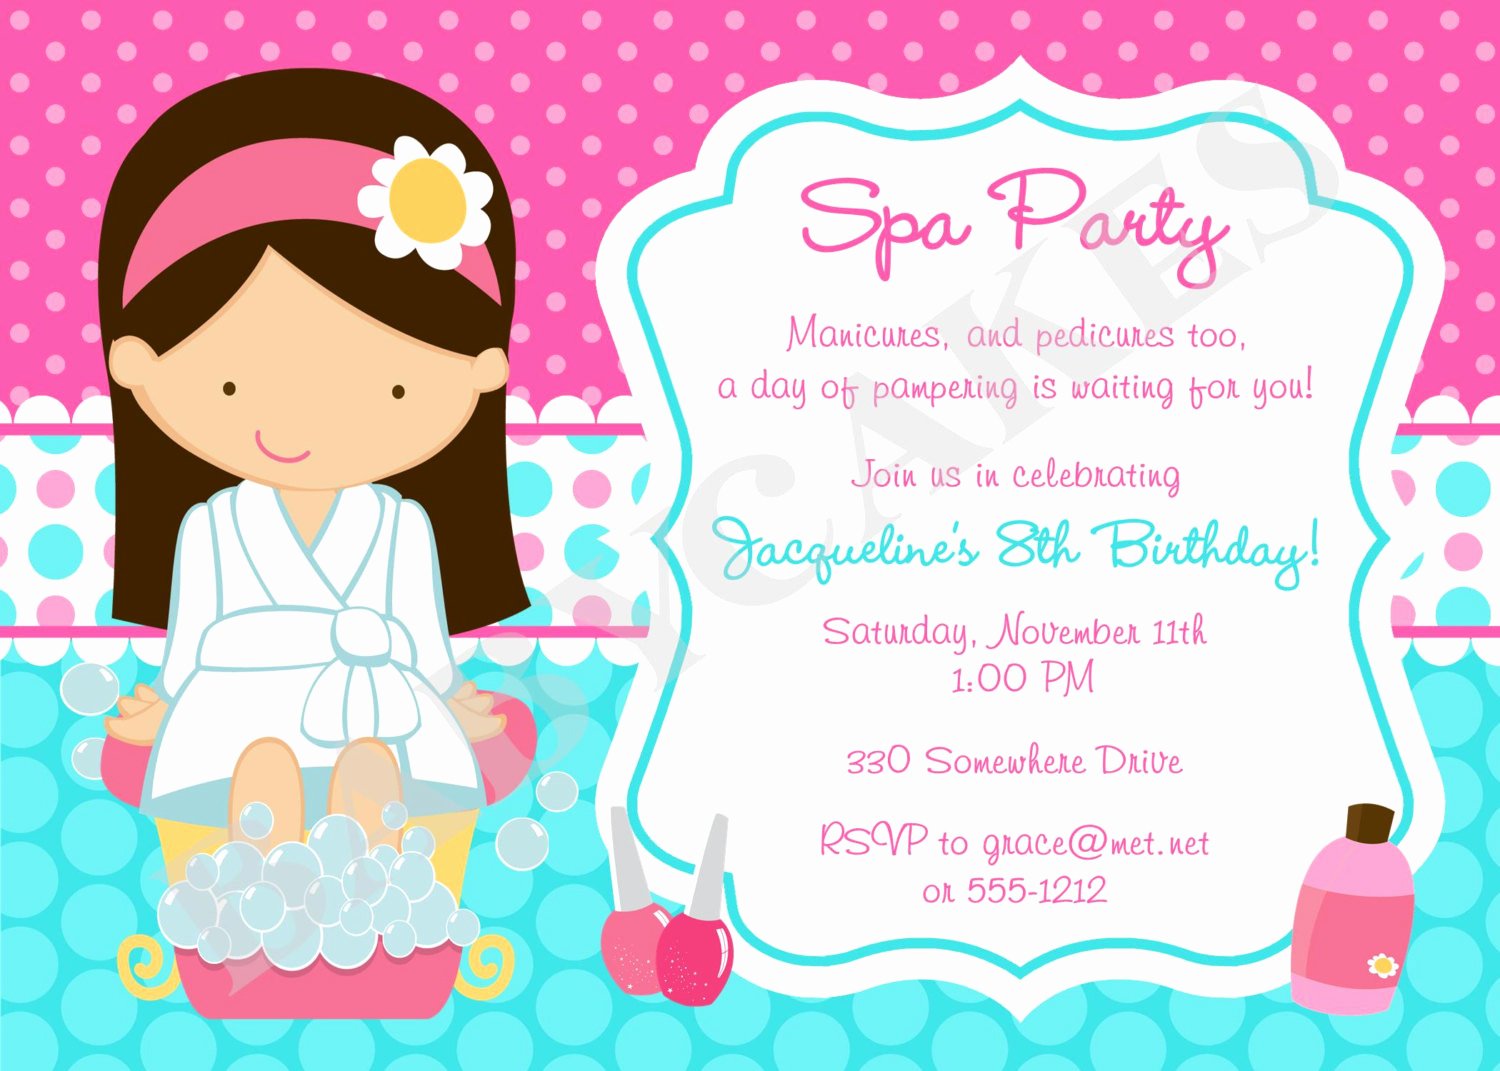 Spa Party Invite Template Awesome Free Printable Spa Birthday Party Invitations